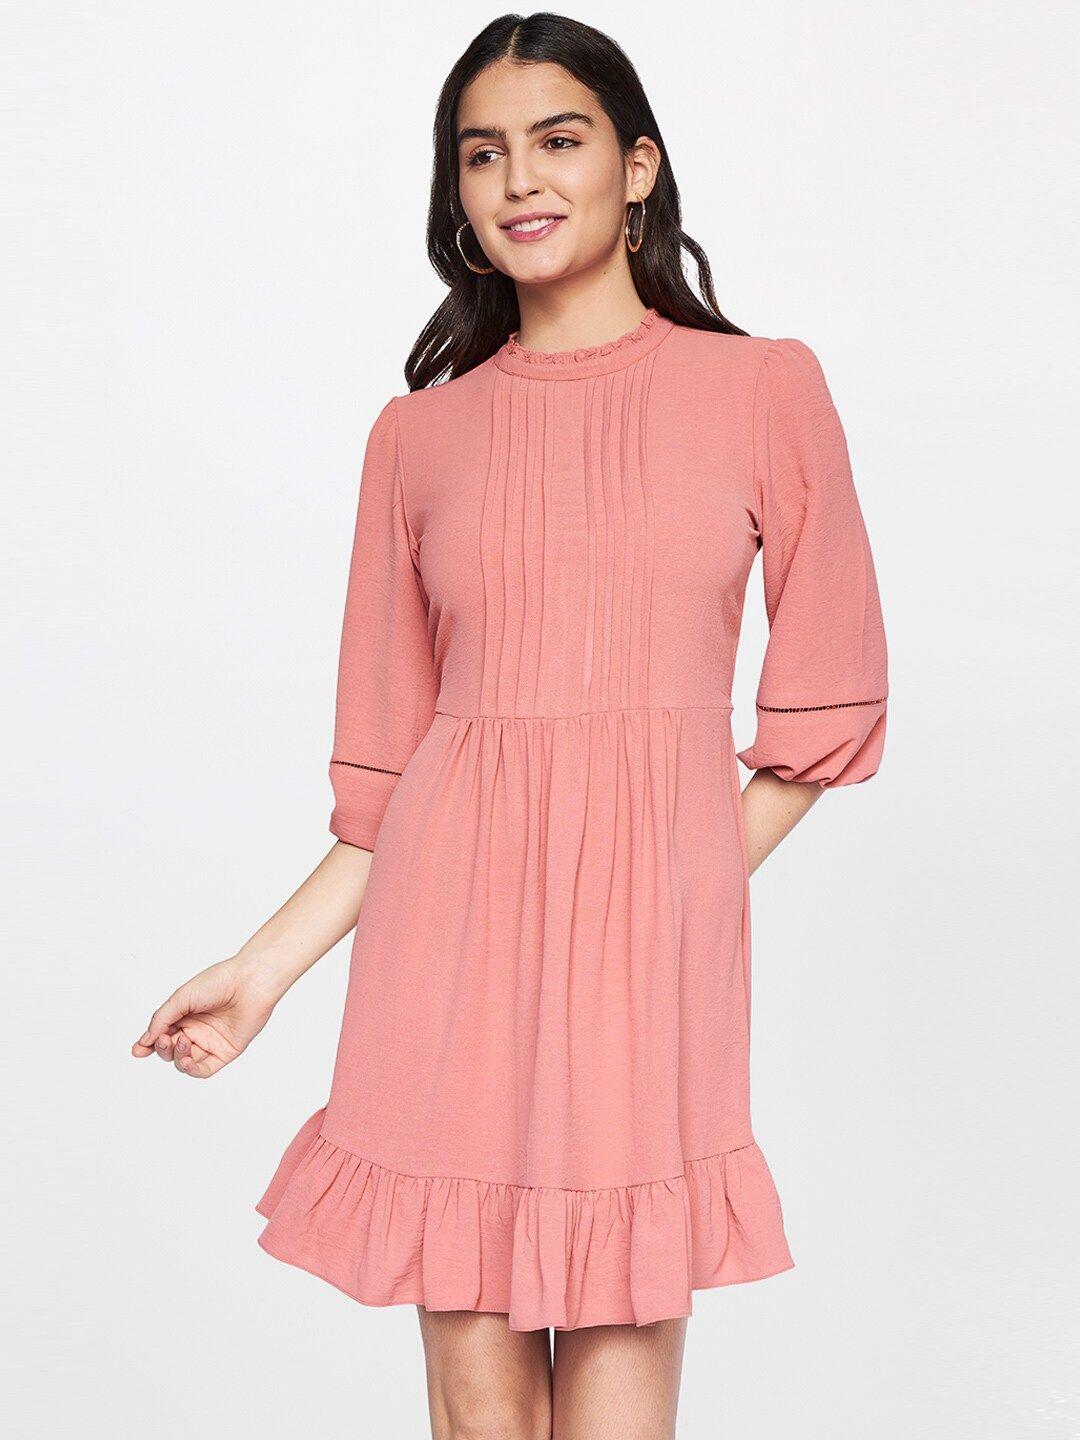 and coral dress ruffled fit & flare dress